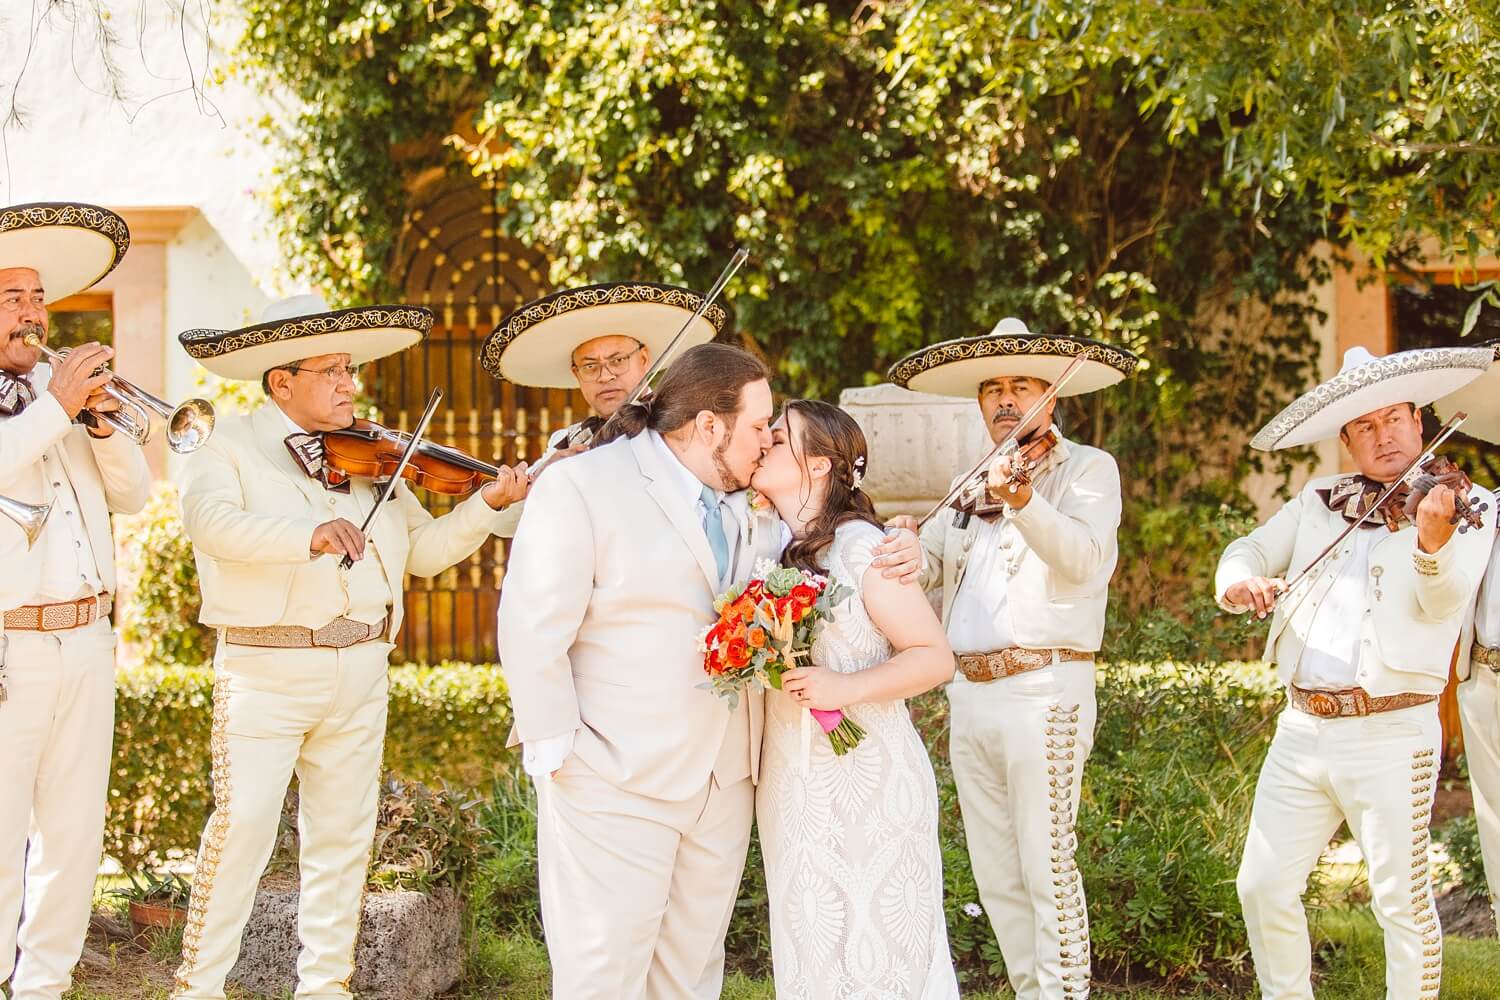 Couple kissing in front of mariachi band | Brooke Michelle Photo